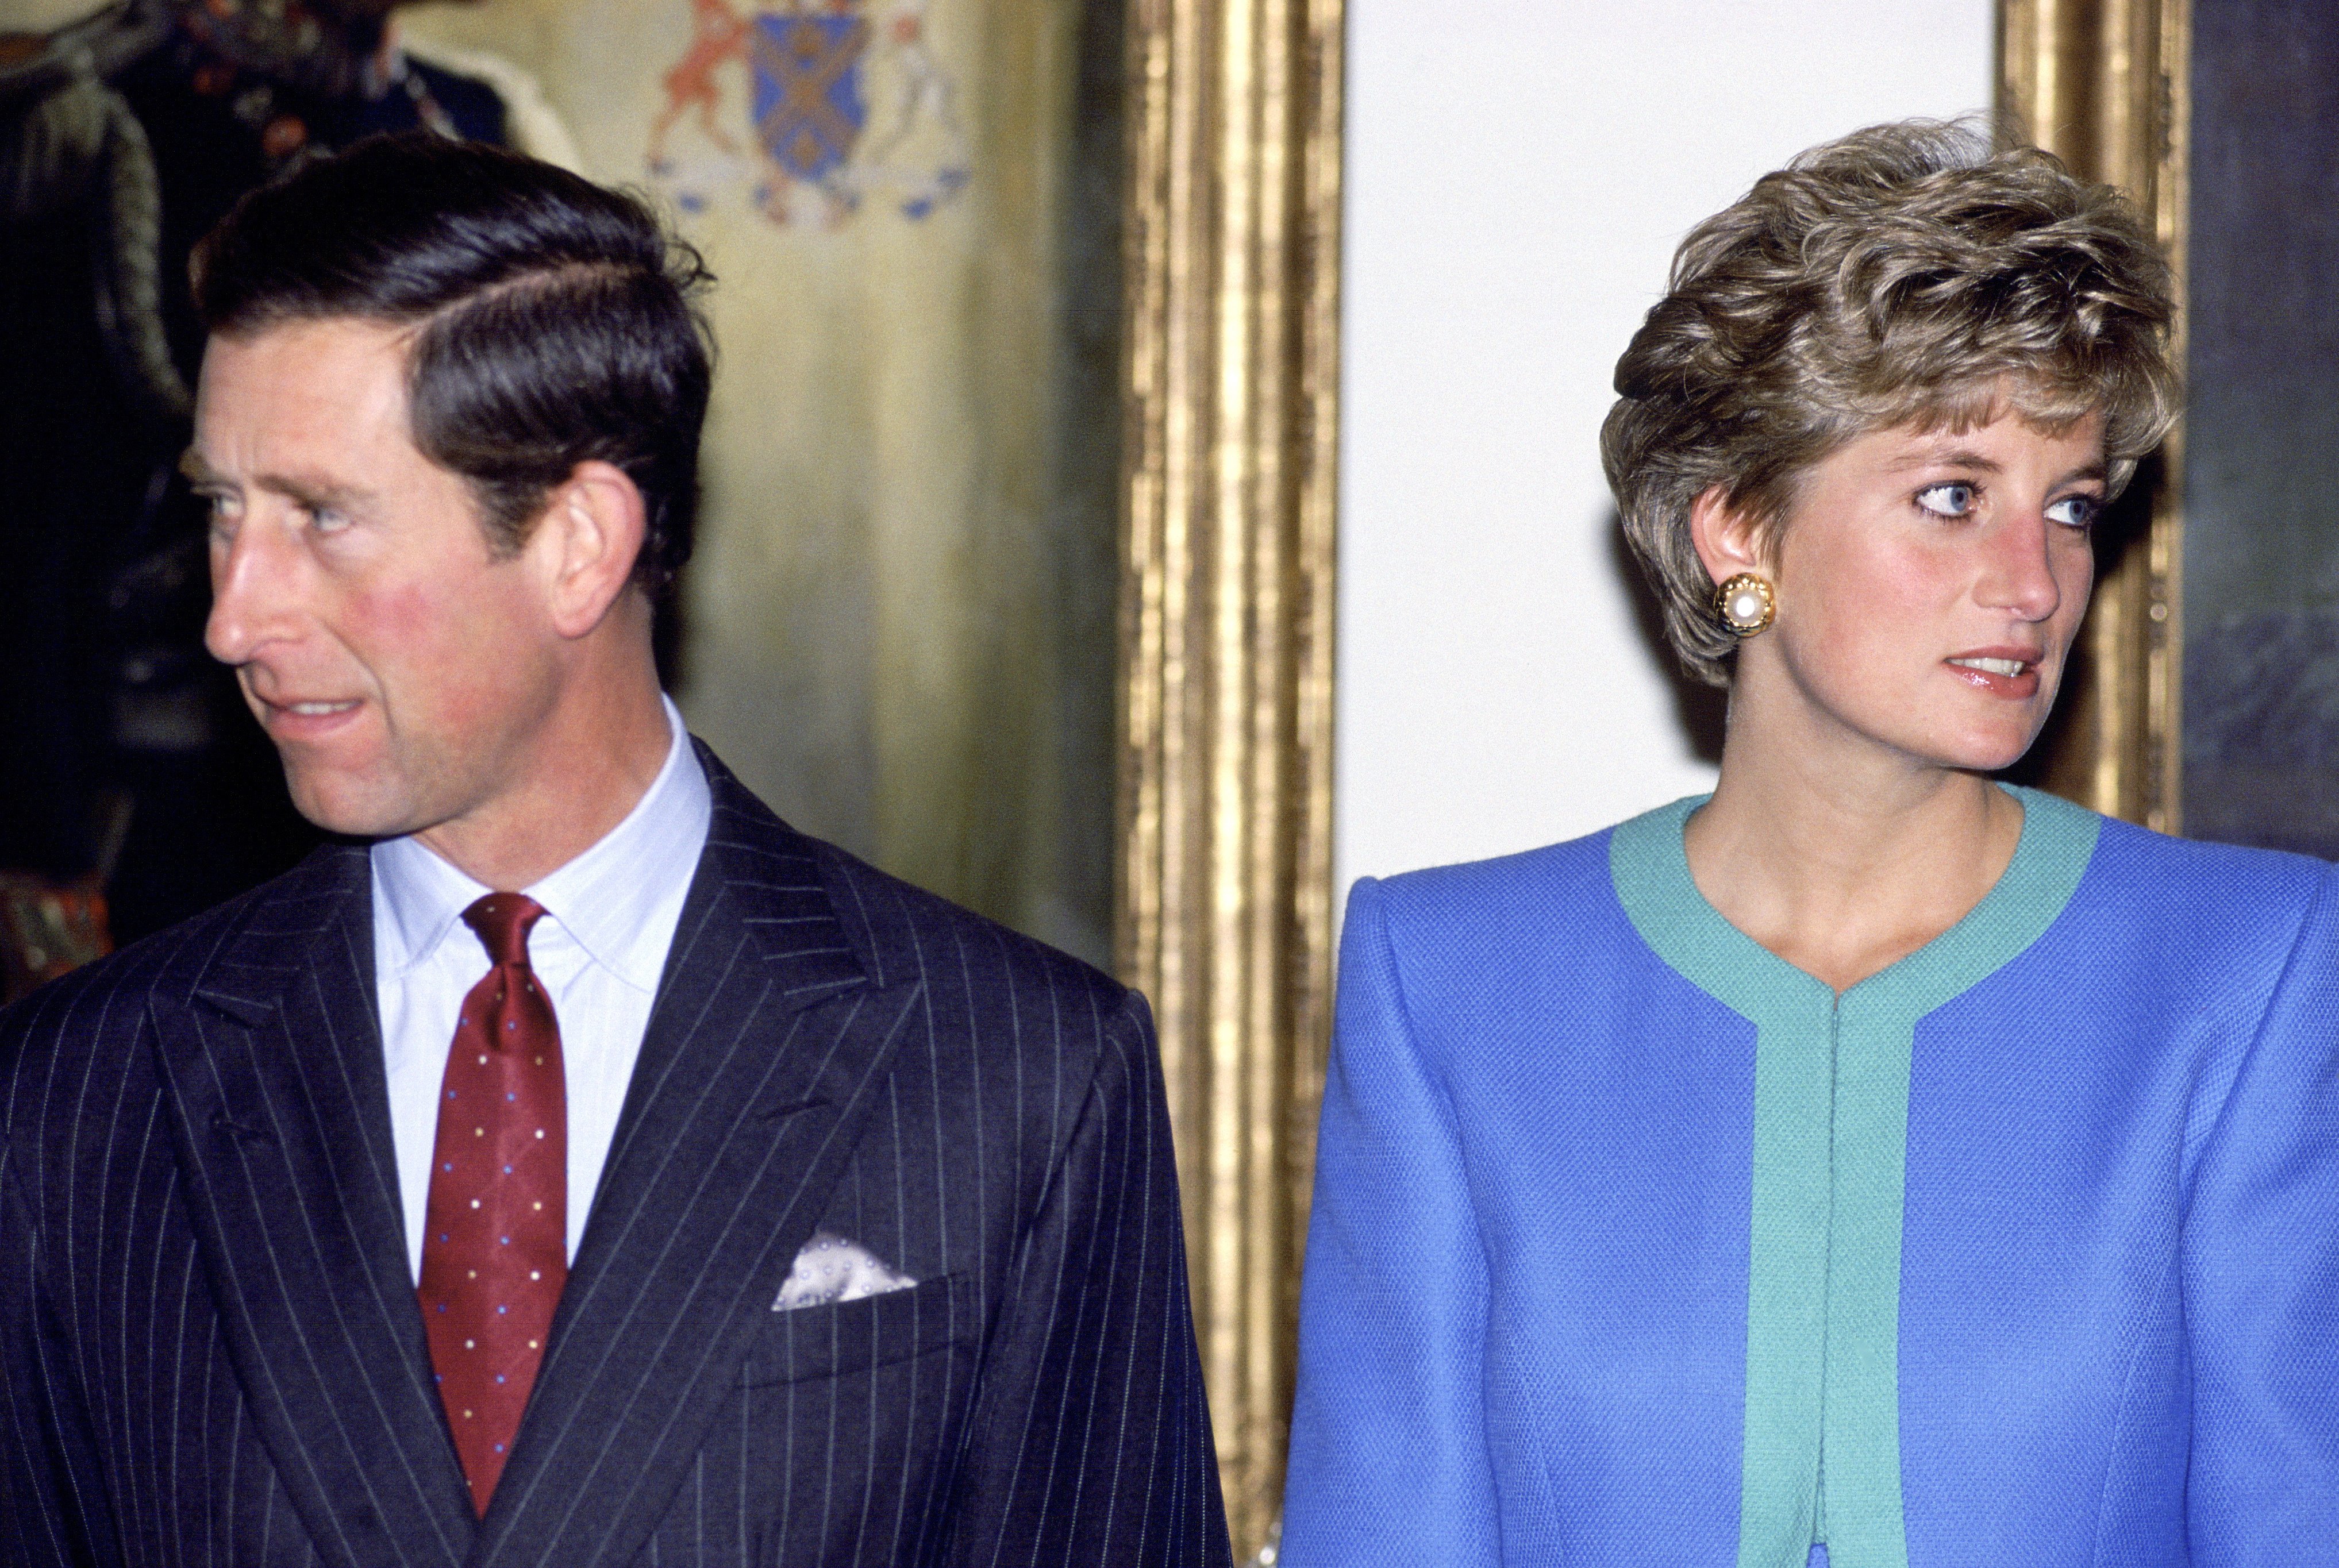 Pictured: The Prince and Princess of Wales during a visit to Ottawa in Canada | Photo: Getty Images